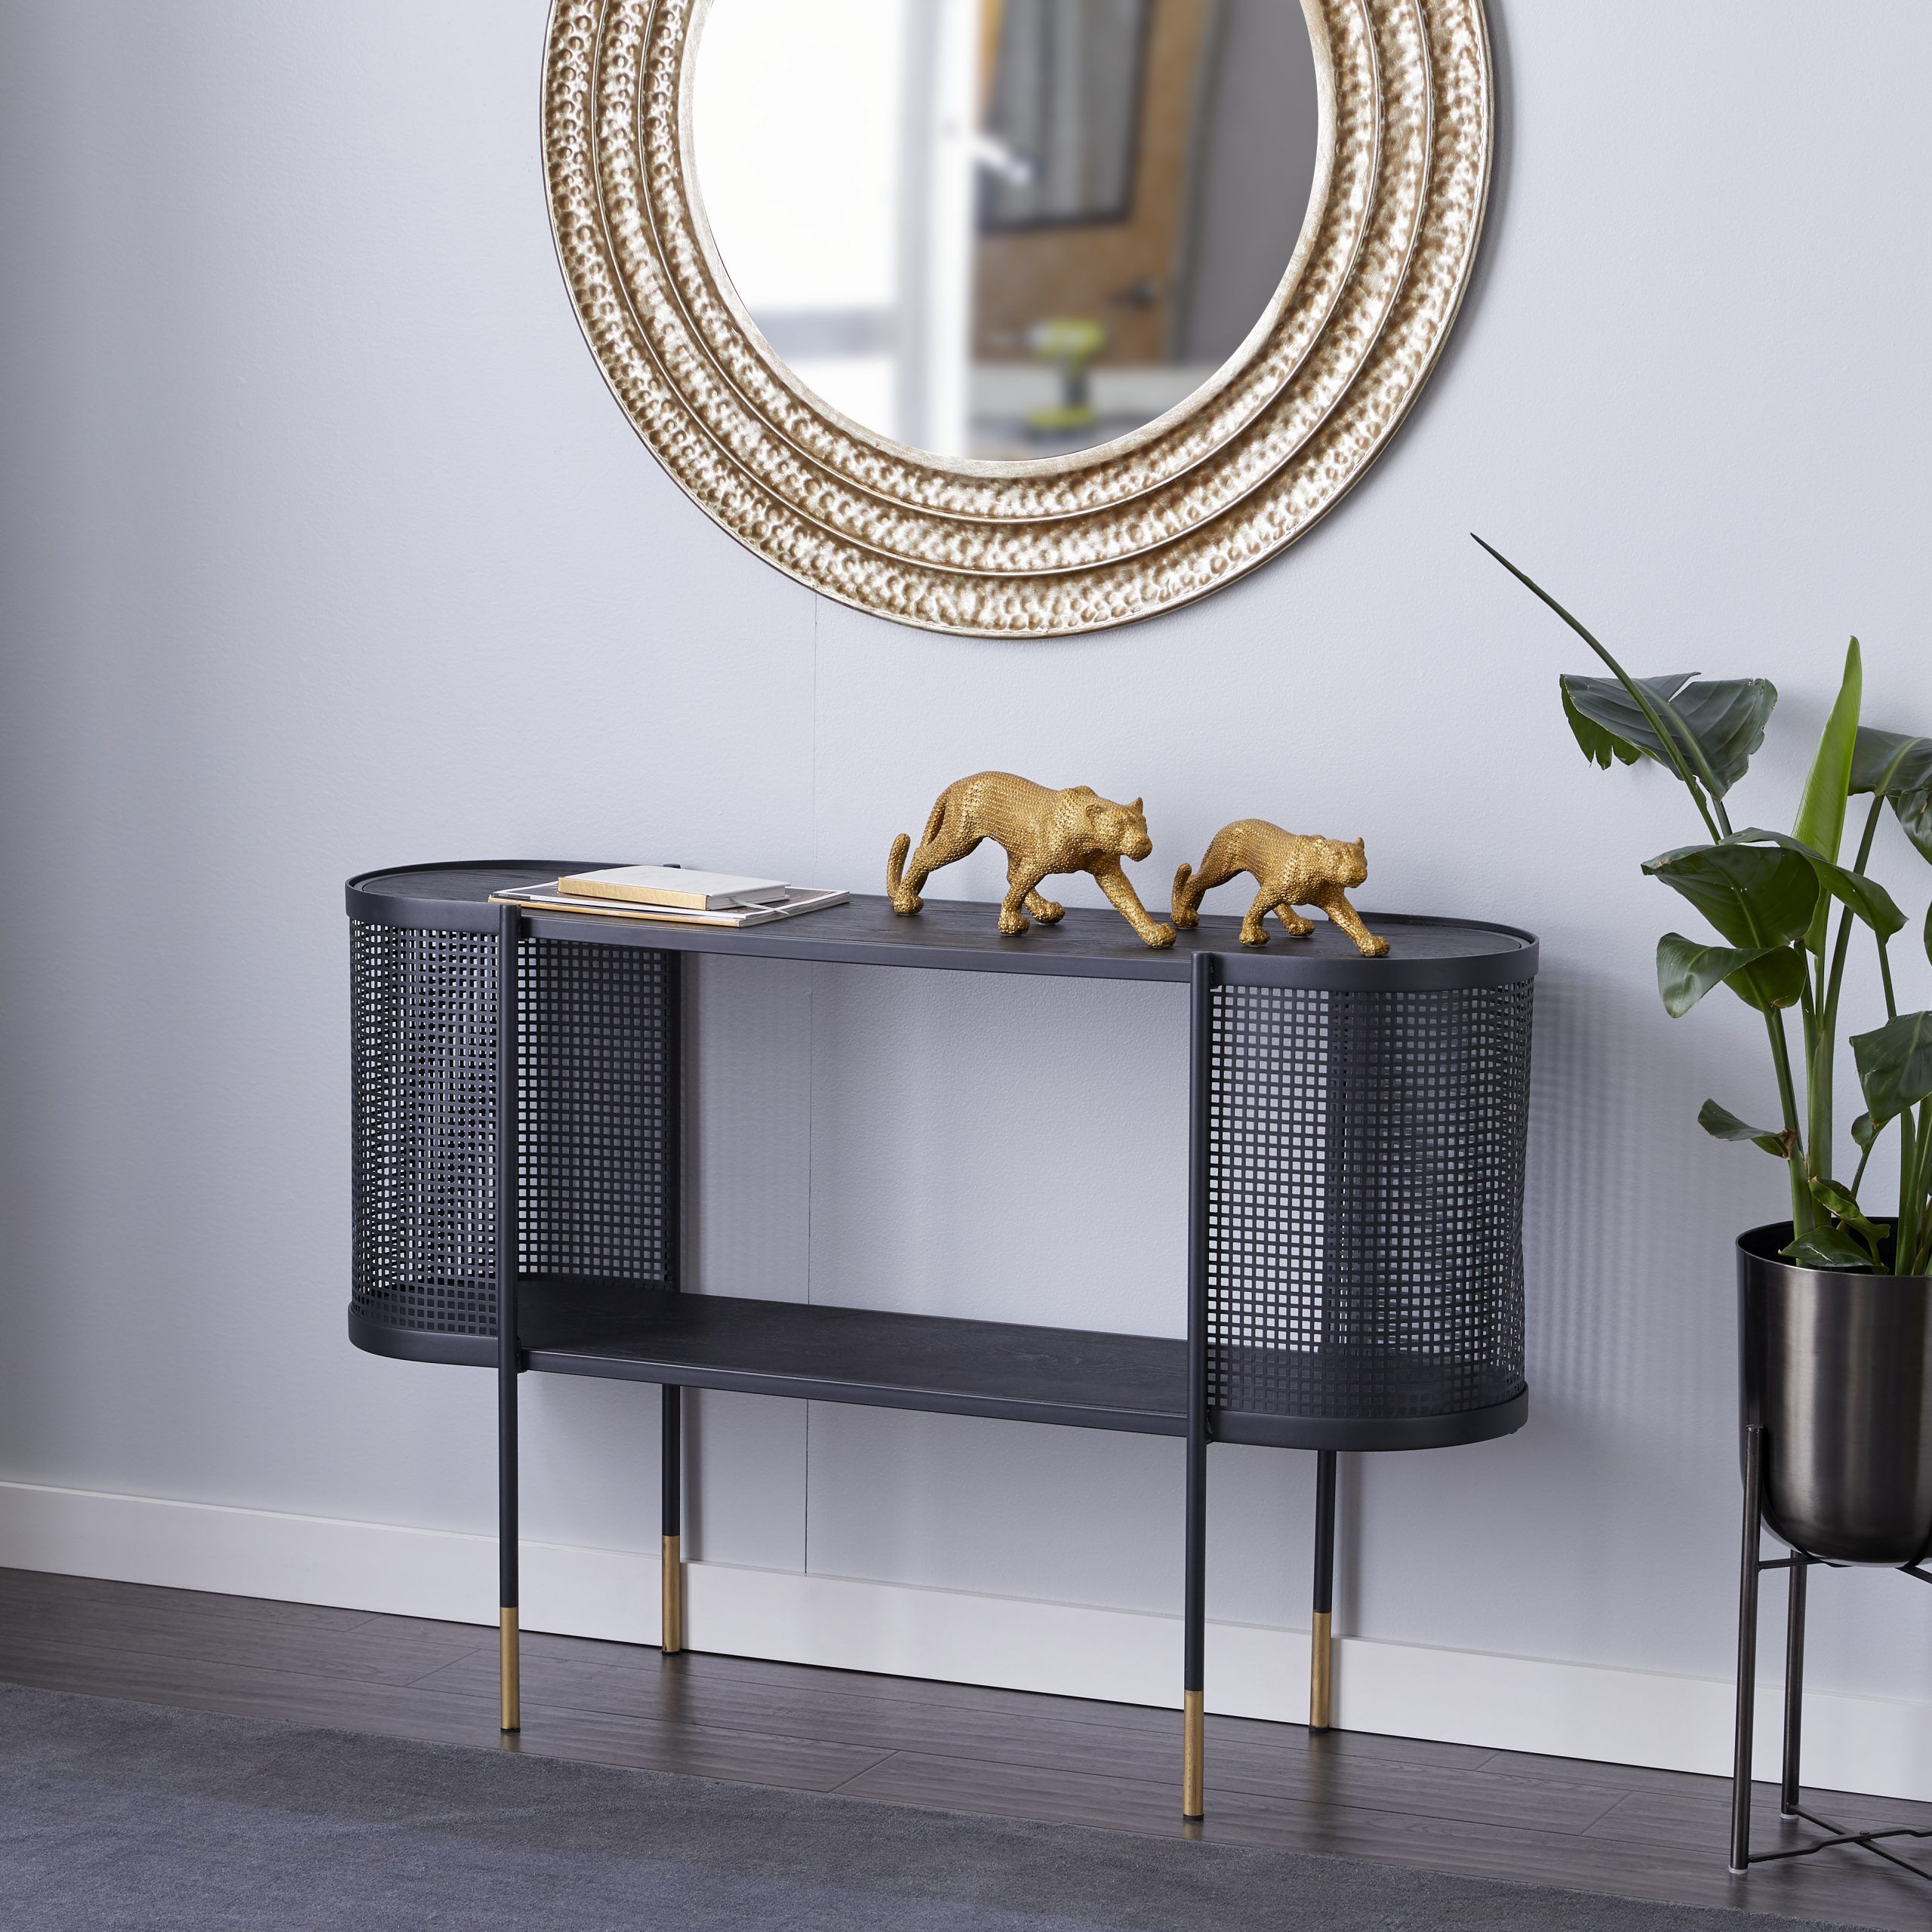 Decmode Oval Black Metal Wrapped Console Table With Open Inside 1 Shelf Square Console Tables (Photo 2 of 20)